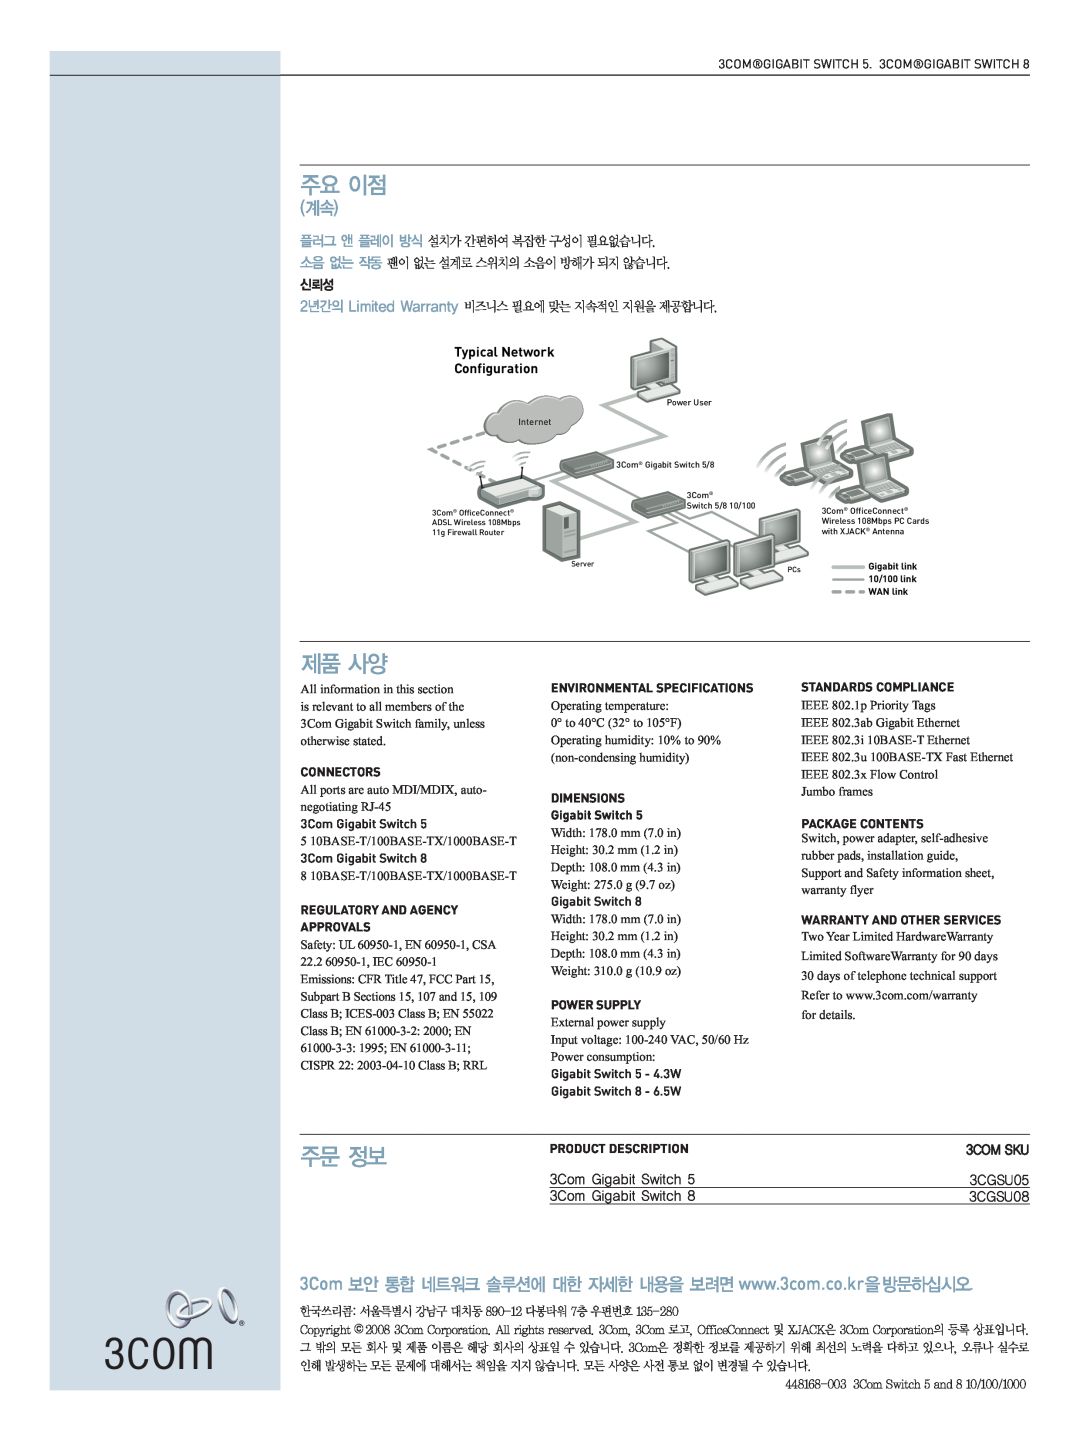 3Com 5 manual 제품 사양, 주문 정보, 주요 이점, Typical Network Configuration, Connectors, Regulatory And Agency Approvals, Power Supply 